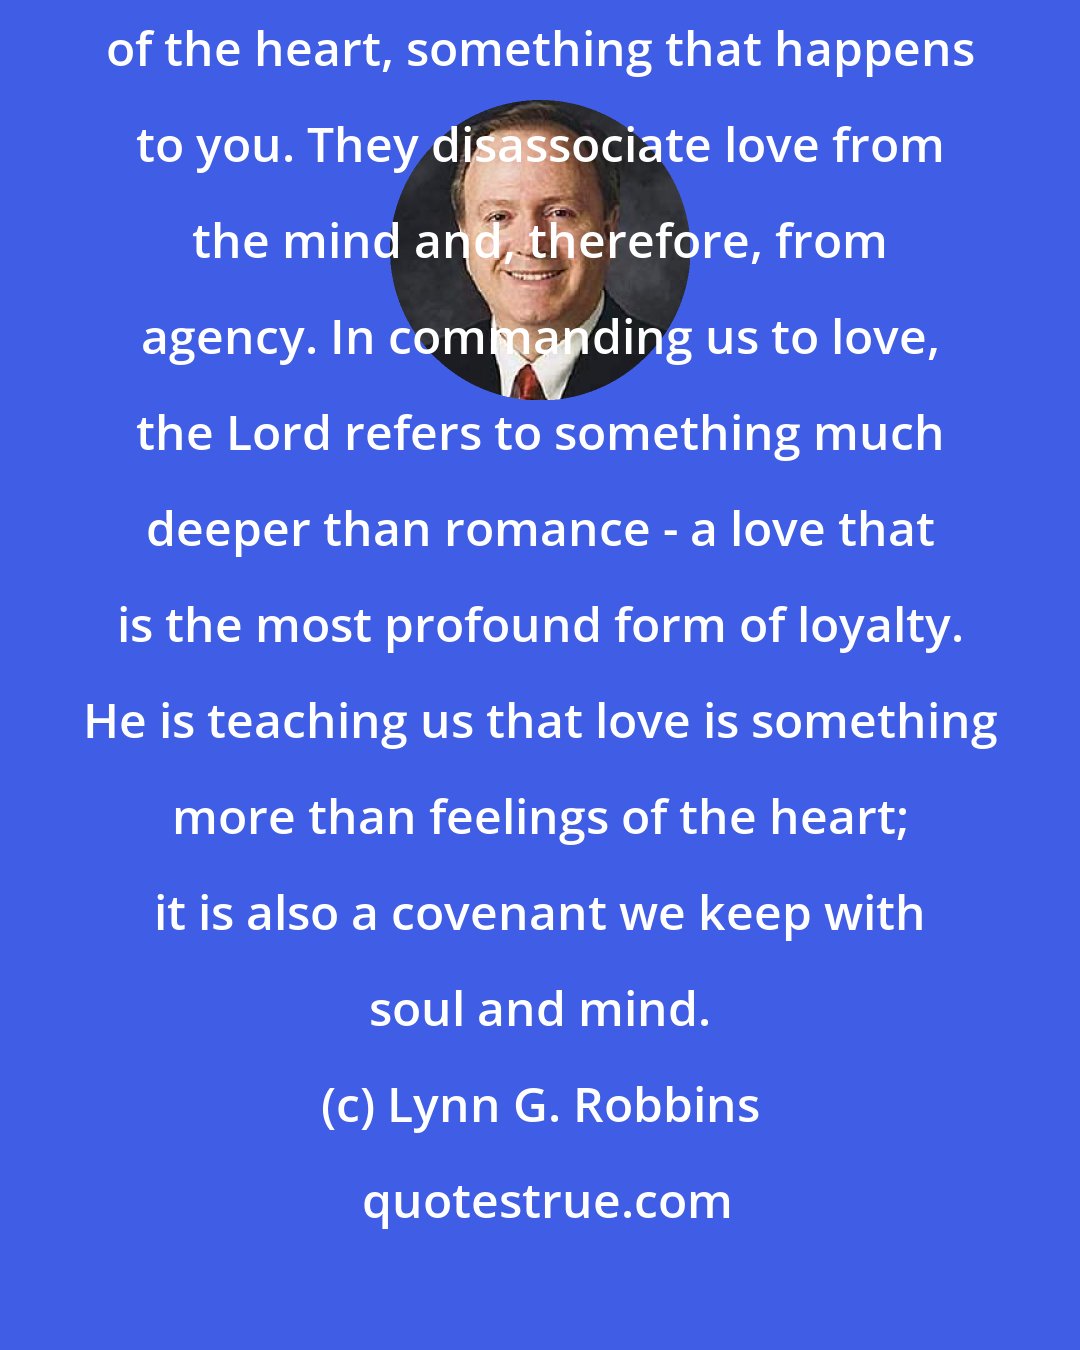 Lynn G. Robbins: Too many believe that love is a condition, a feeling that involves 100 percent of the heart, something that happens to you. They disassociate love from the mind and, therefore, from agency. In commanding us to love, the Lord refers to something much deeper than romance - a love that is the most profound form of loyalty. He is teaching us that love is something more than feelings of the heart; it is also a covenant we keep with soul and mind.